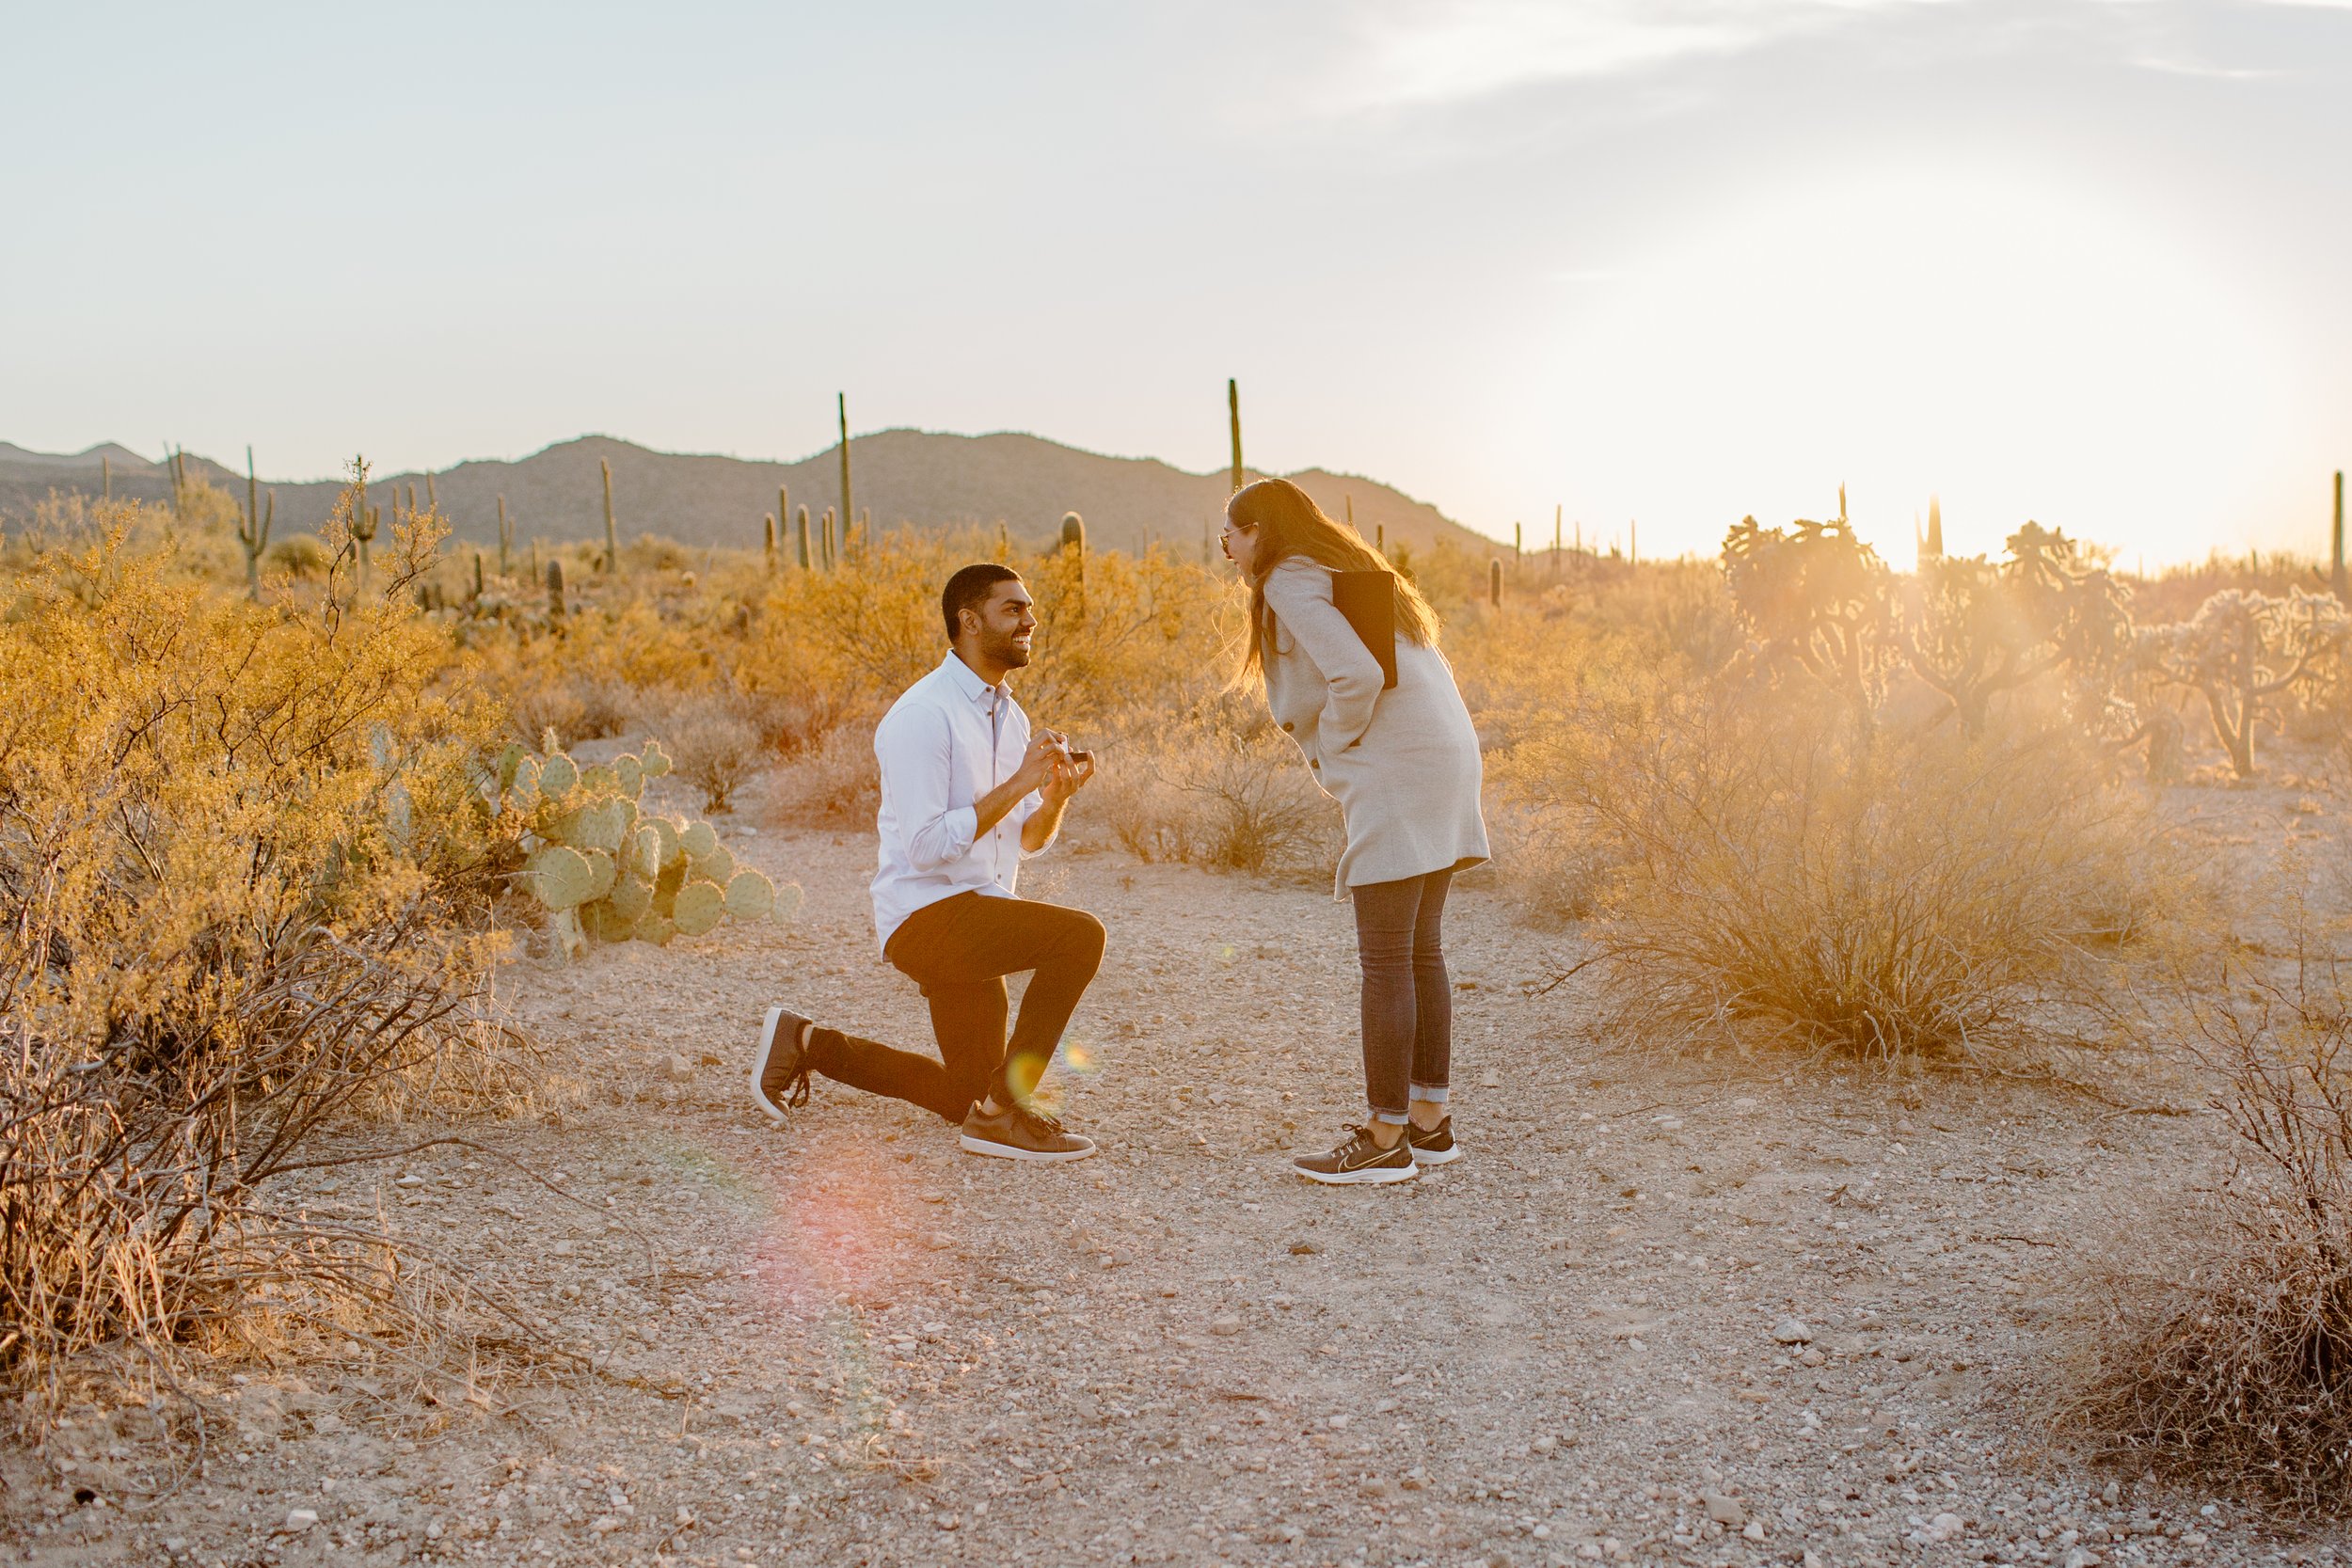  Man proposes to his girlfriend and she reacts happily surrounded by cacti in the desert of Tucson Arizona 